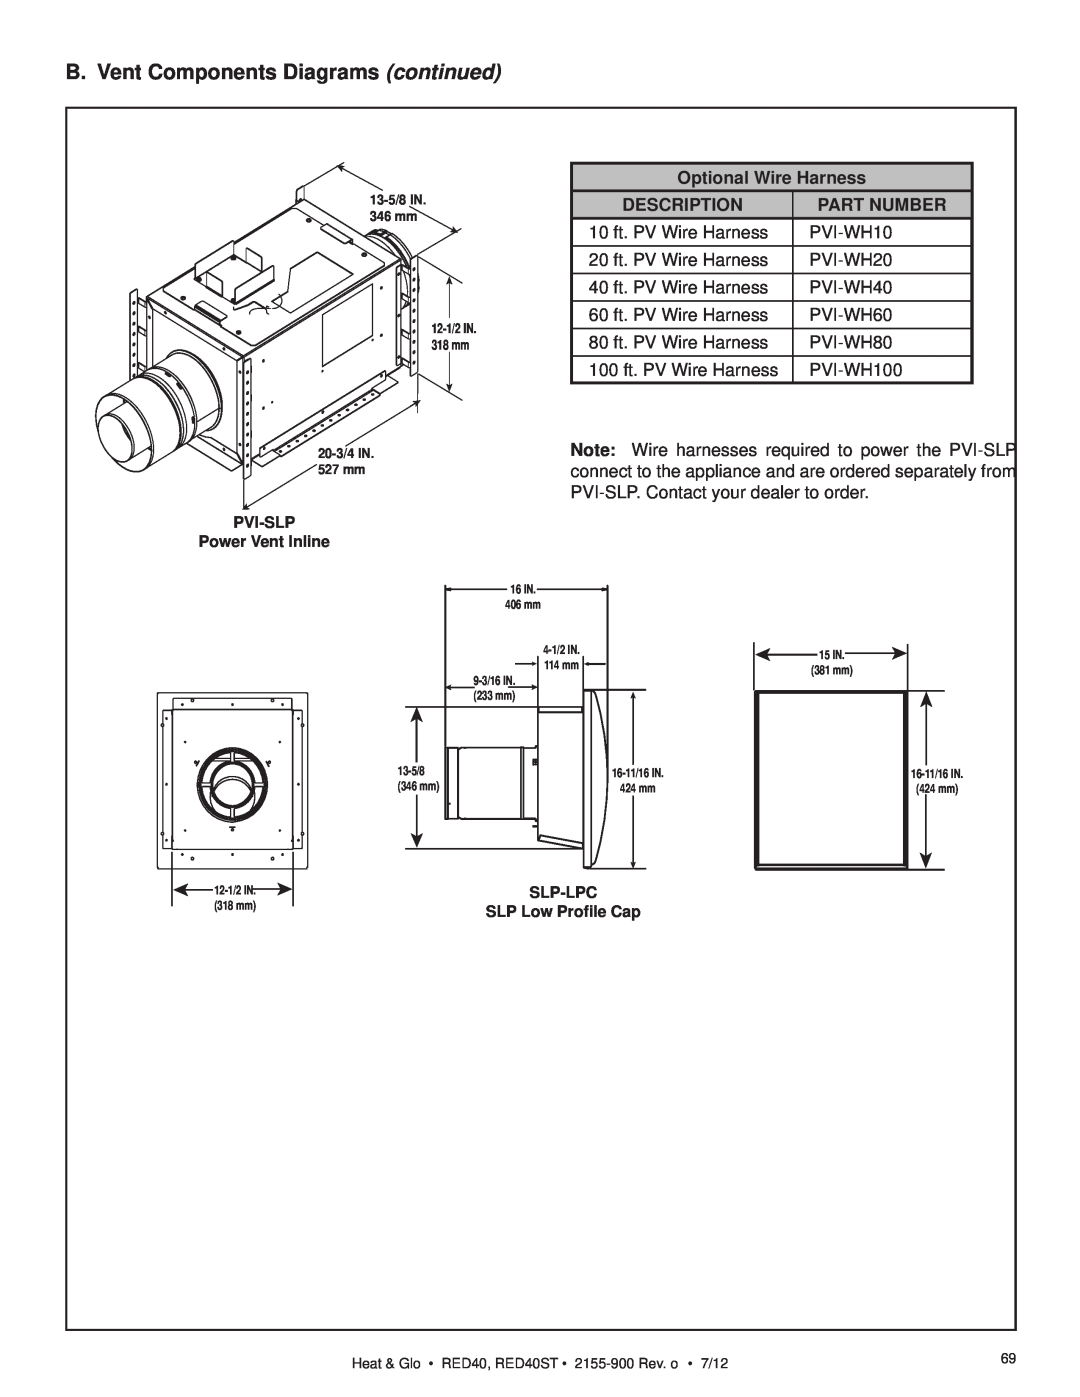 Heat & Glo LifeStyle RED40ST B. Vent Components Diagrams continued, Optional Wire Harness, Description, Part Number 